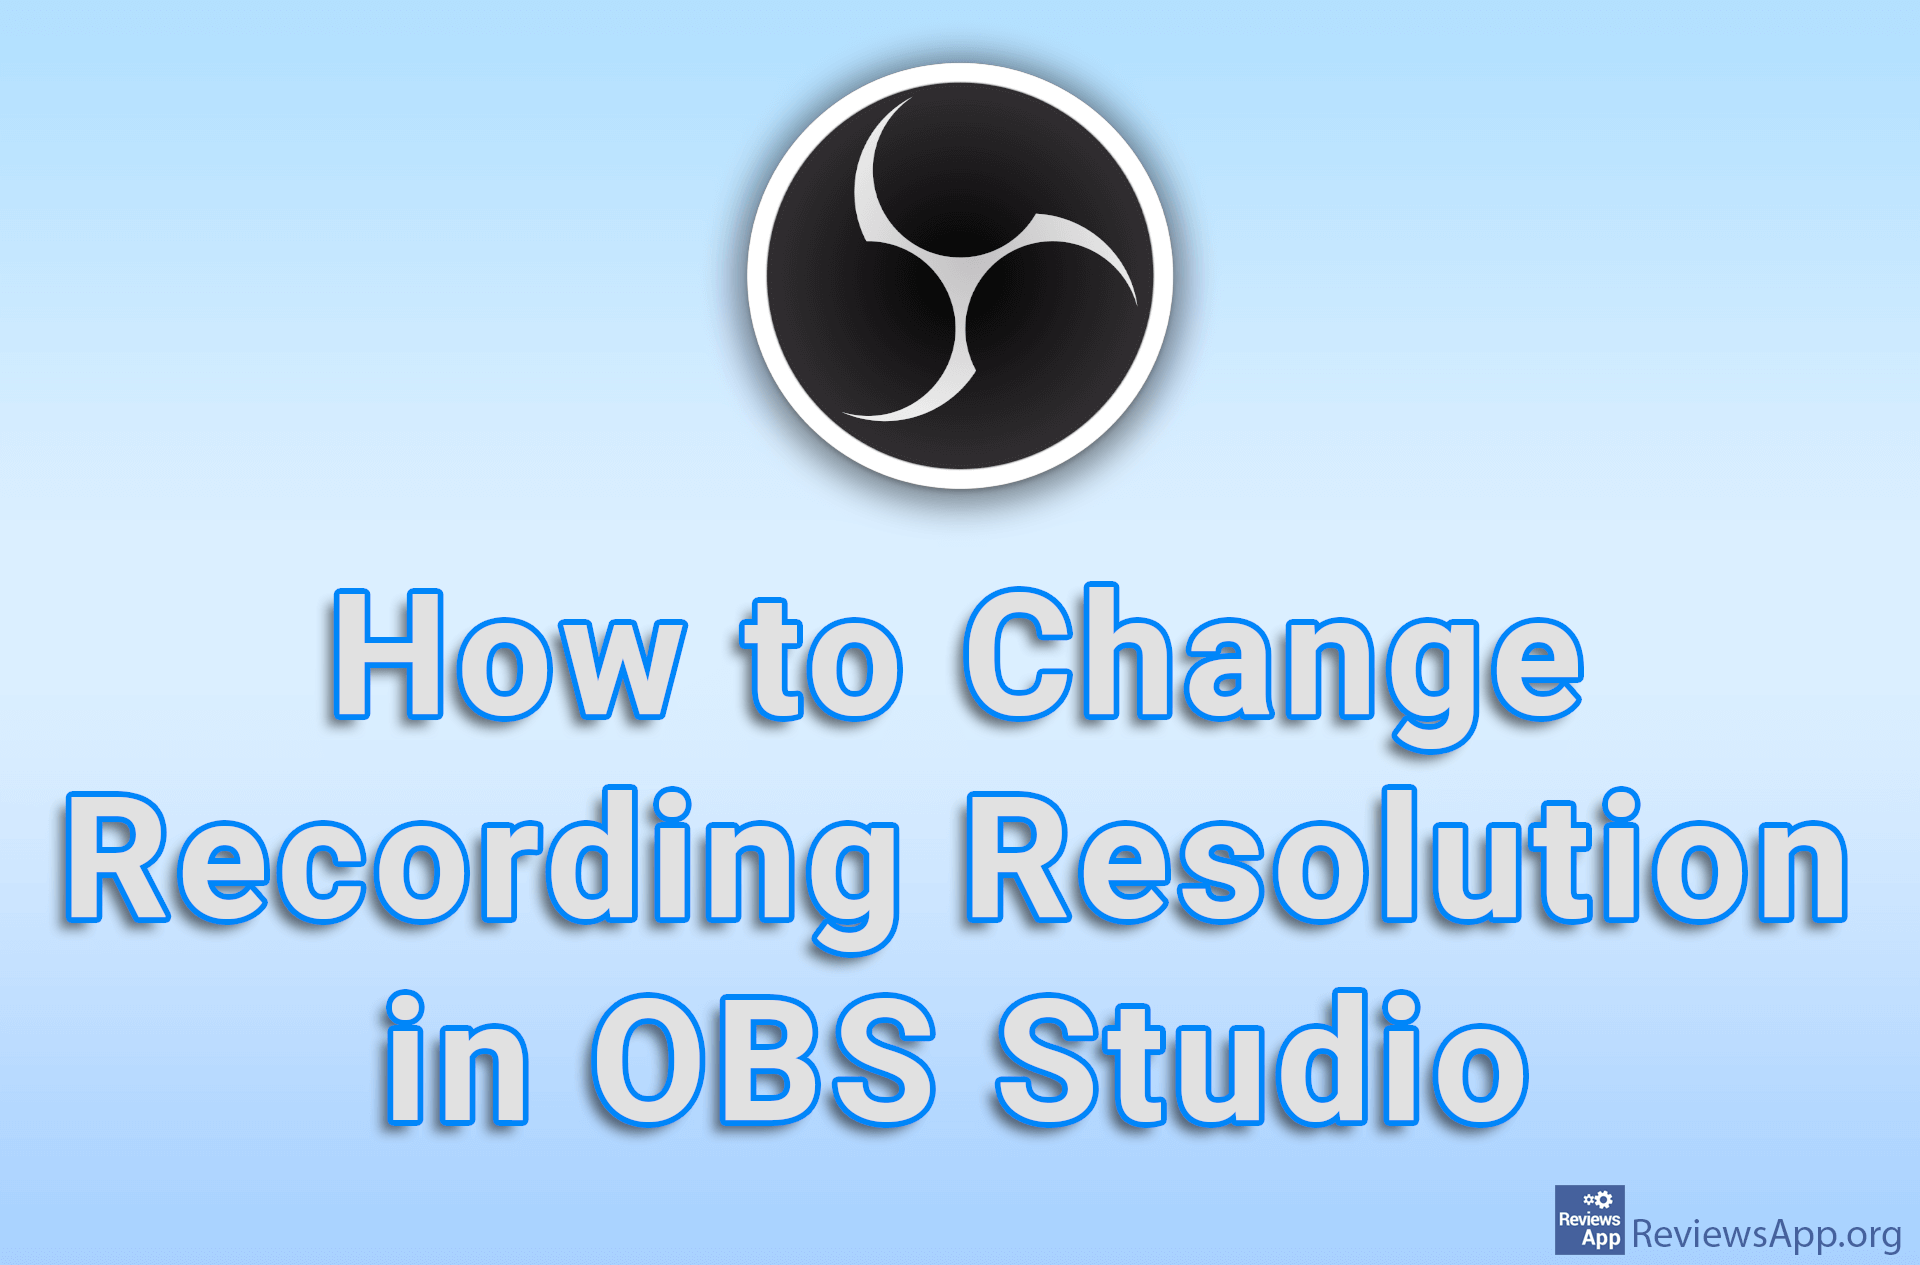 How to Change Recording Resolution in OBS Studio